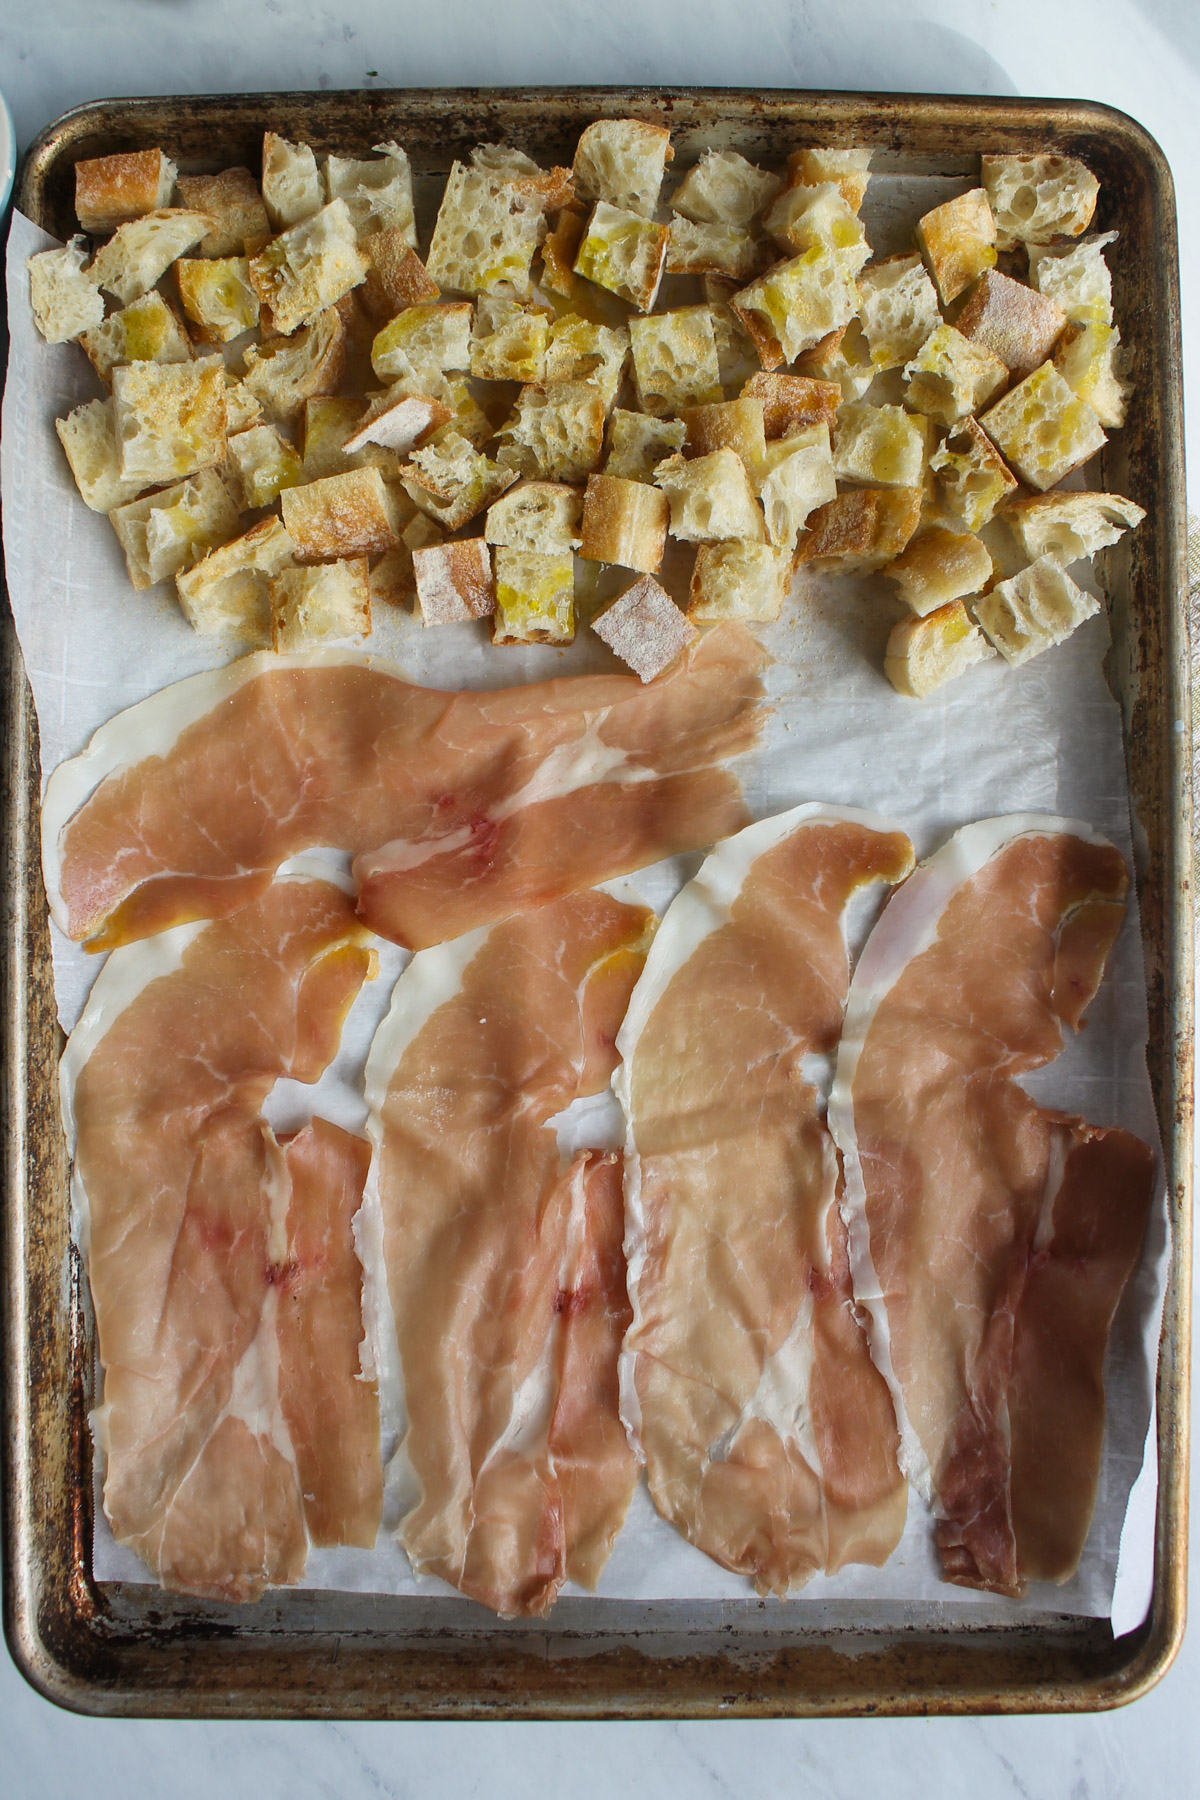 Raw croutons and prosciutto on a sheet pan ready to bake.